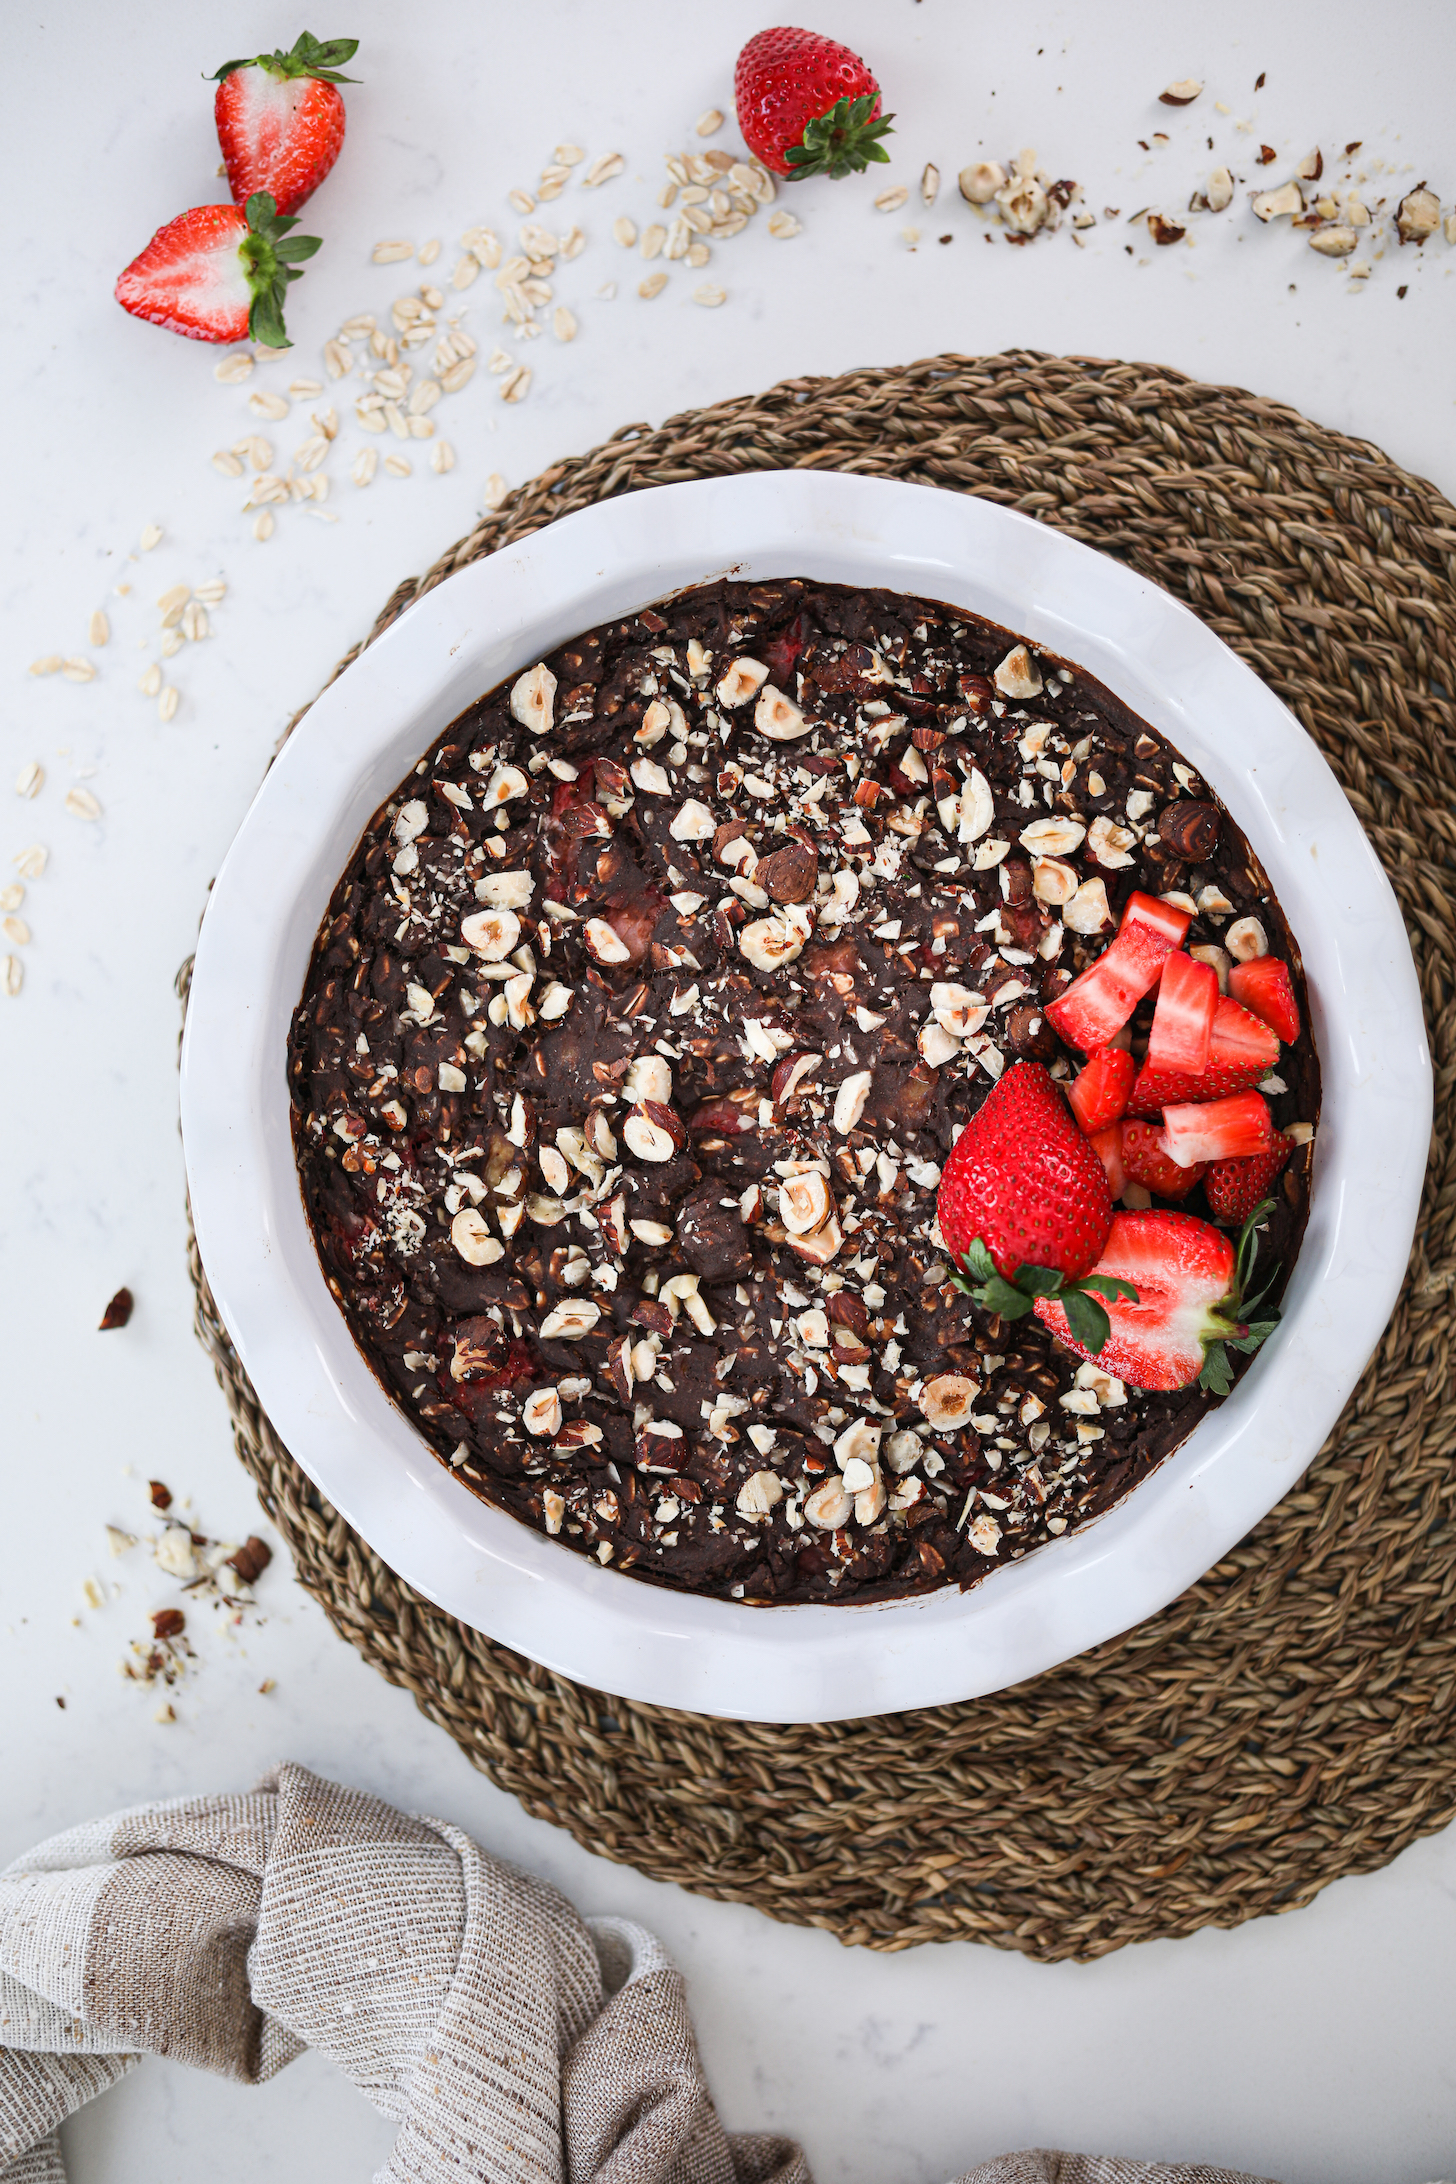 Top view of a bowl of chocolate dessert topped with crushed nuts and a small pile of strawberries styled on a straw mat.